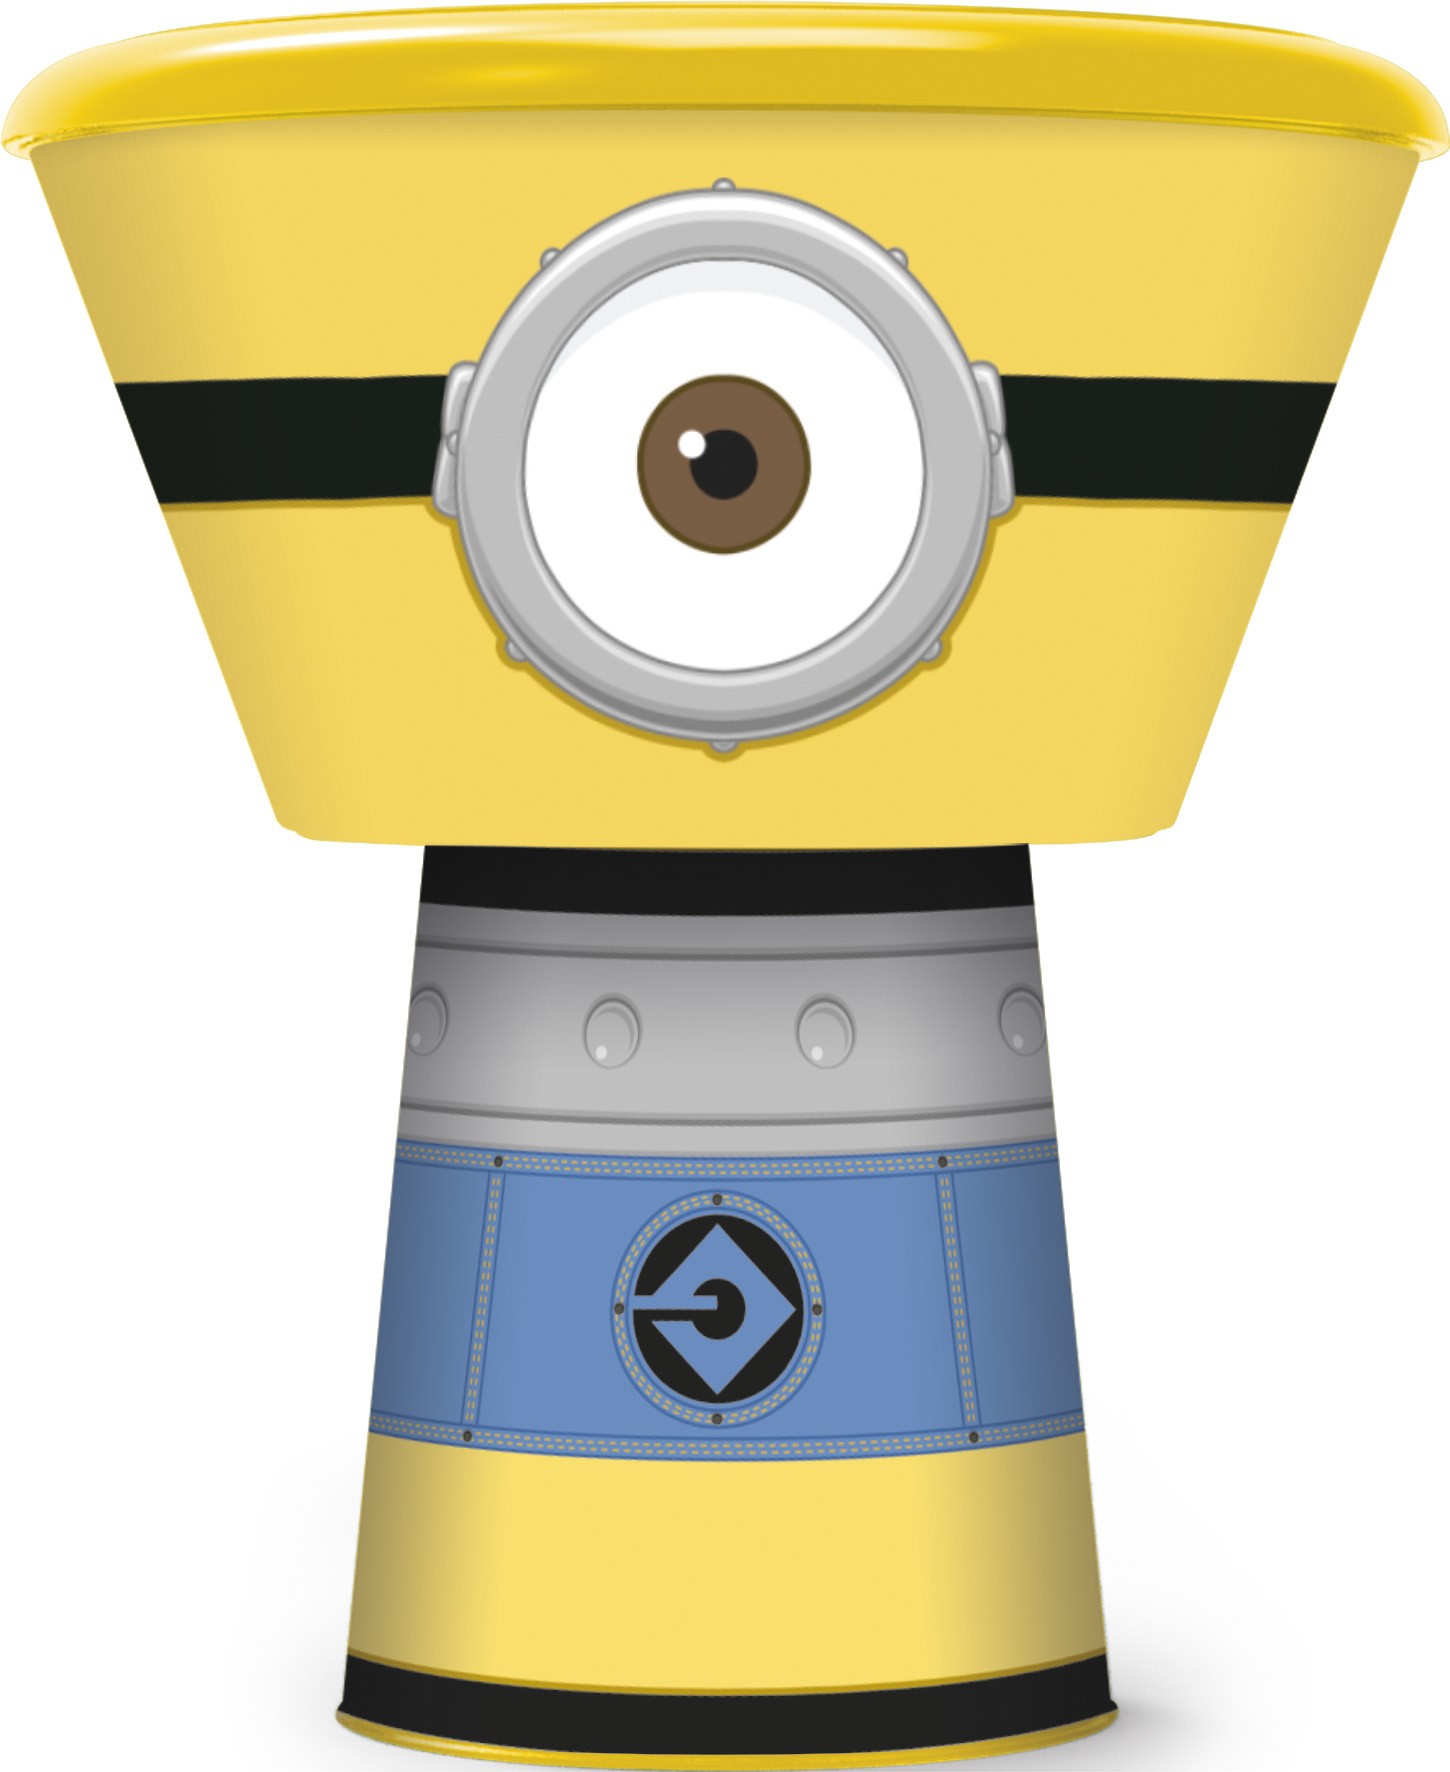 Despicable Me 'Minion' Stacking 3 Piece Meal Set Dinner